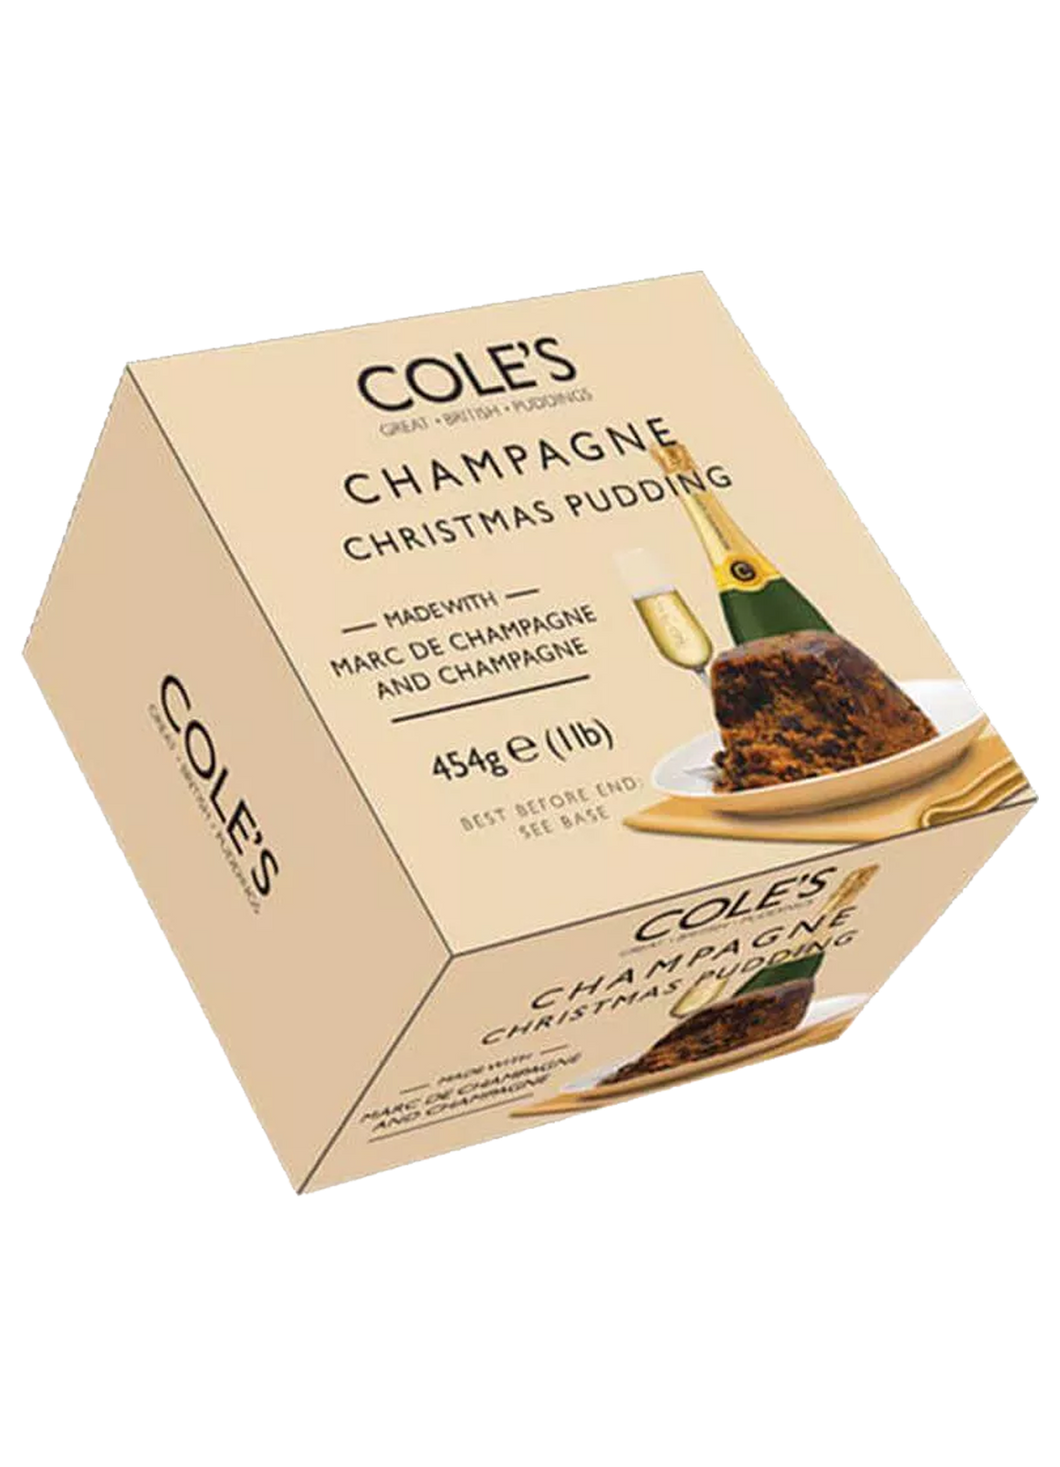 Cole's Champagne Christmas Pudding 454g